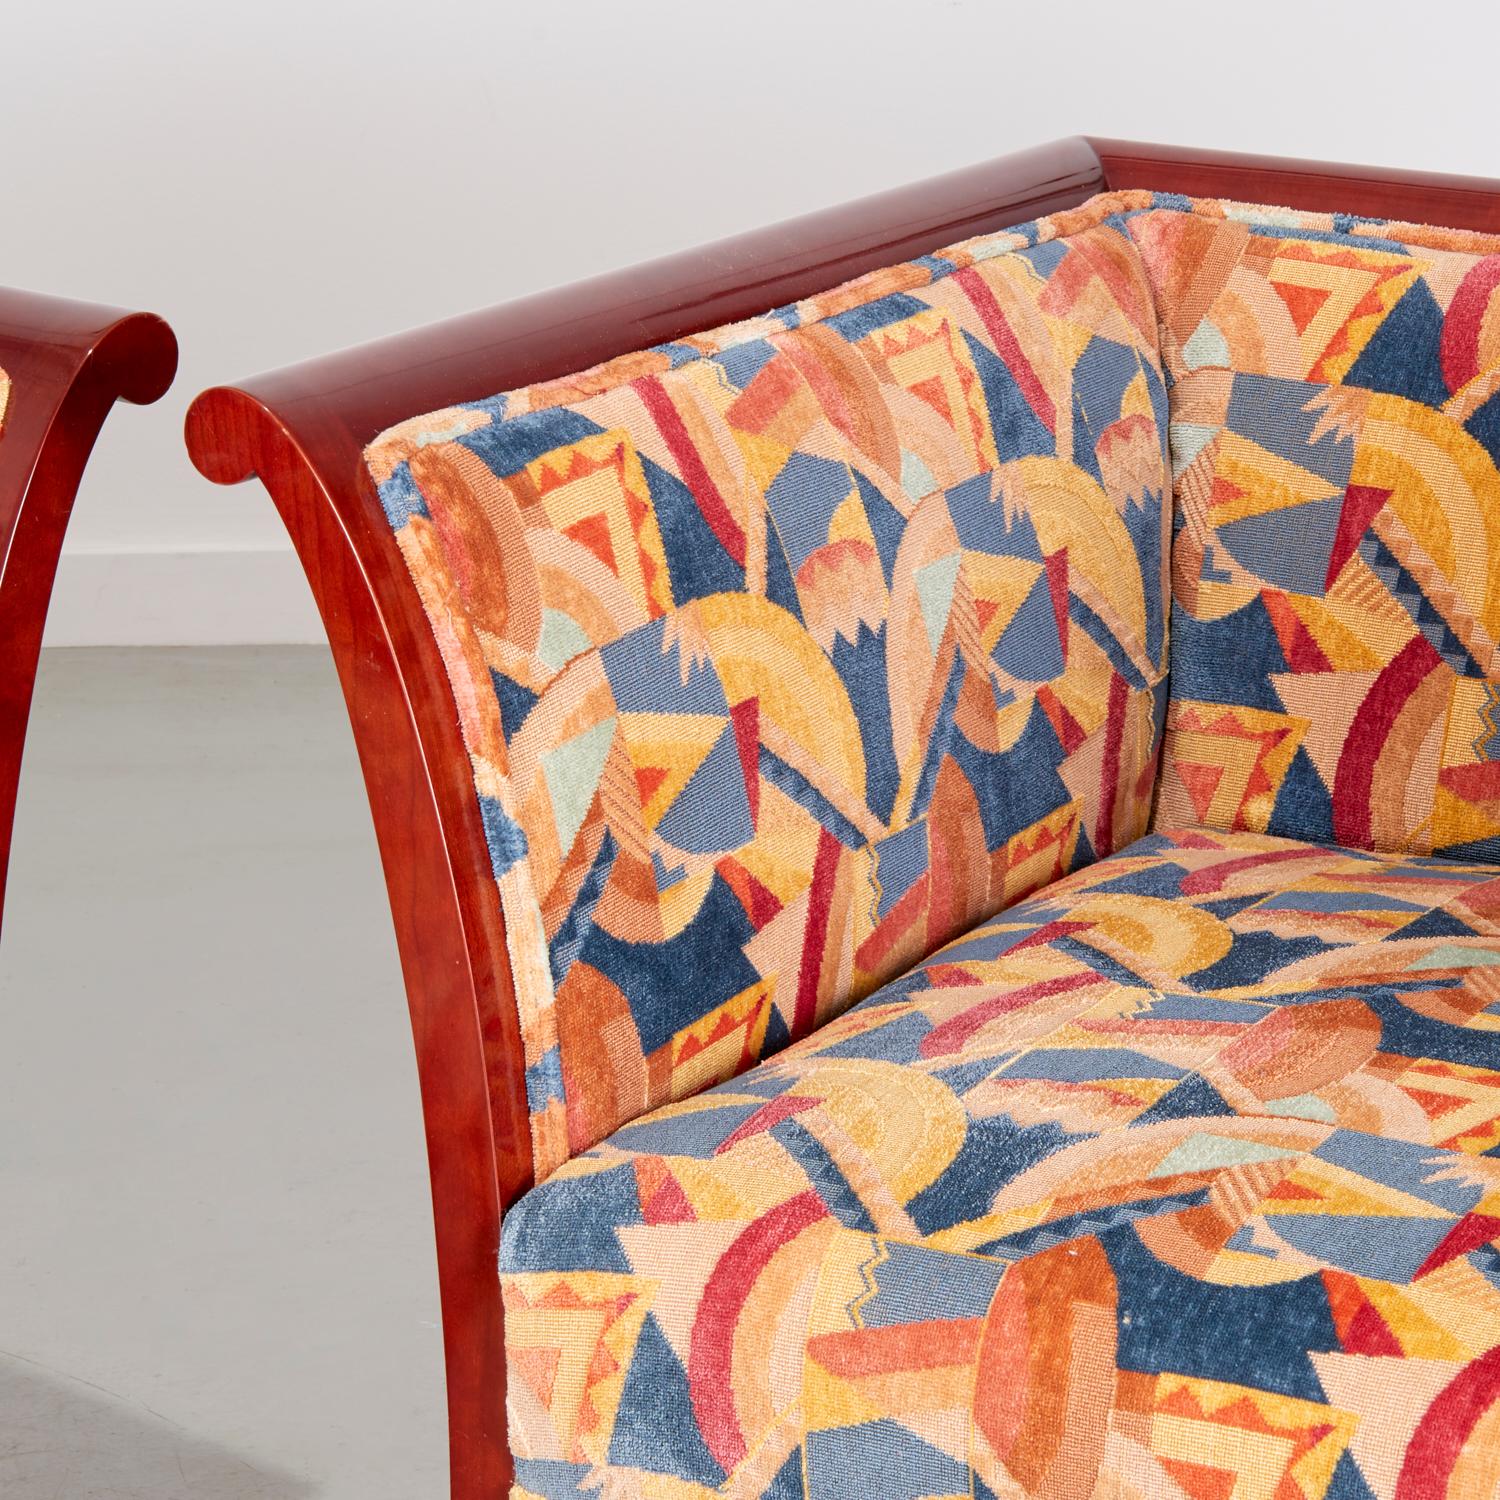 American Kenneth Winslow Club Chairs in Deco Inspired Clarence House Cut Velvet Jacquard 